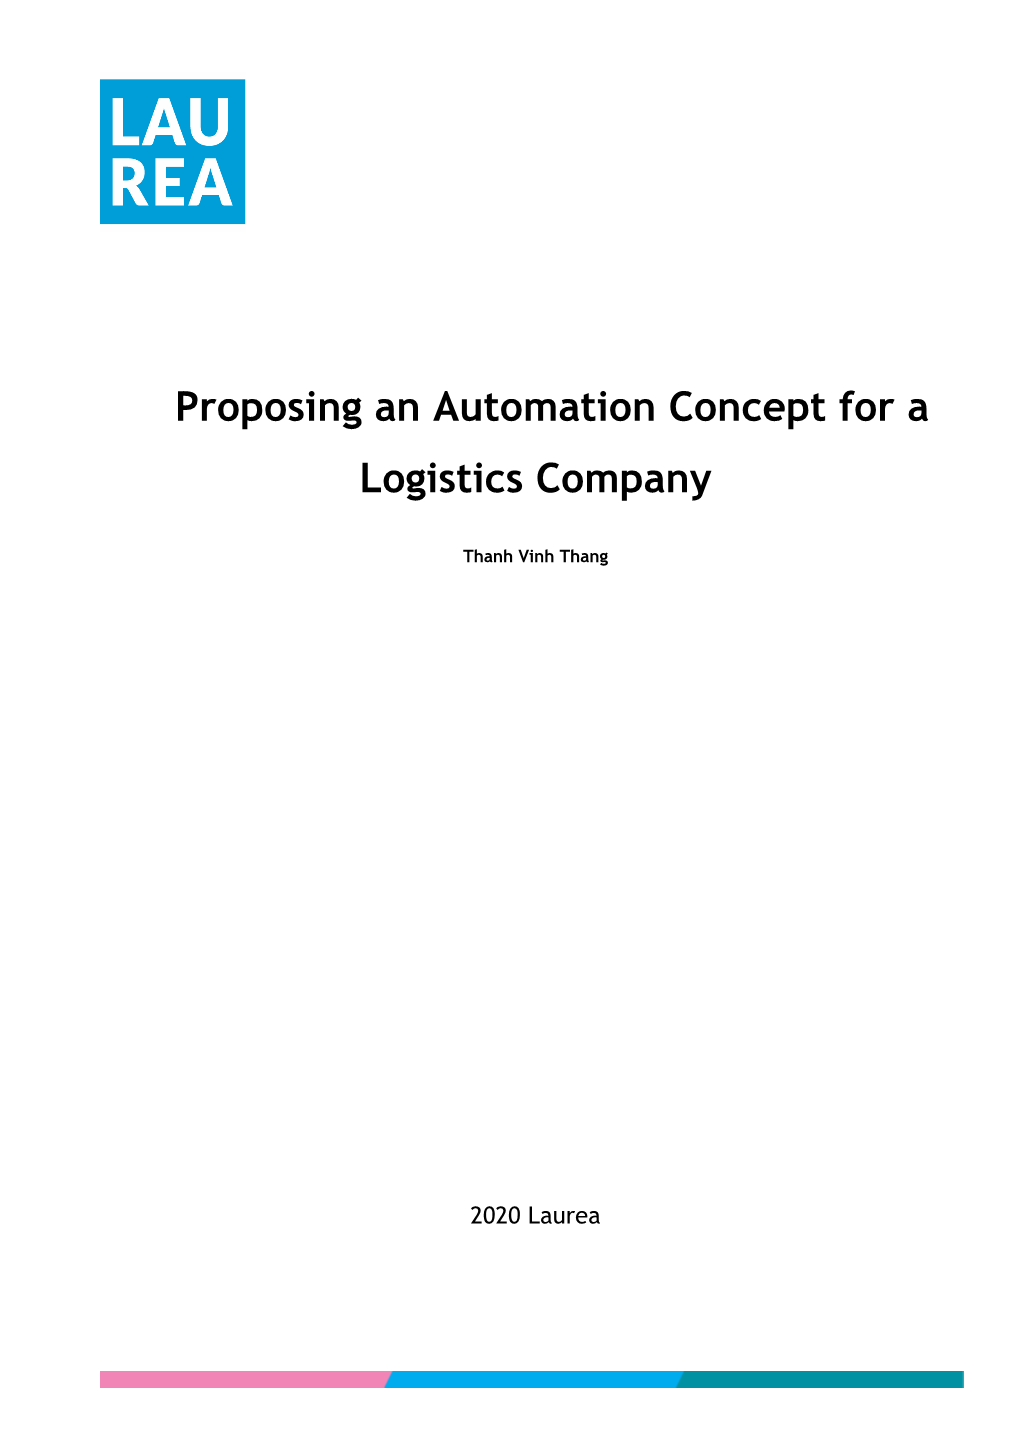 Proposing an Automation Concept for a Logistics Company